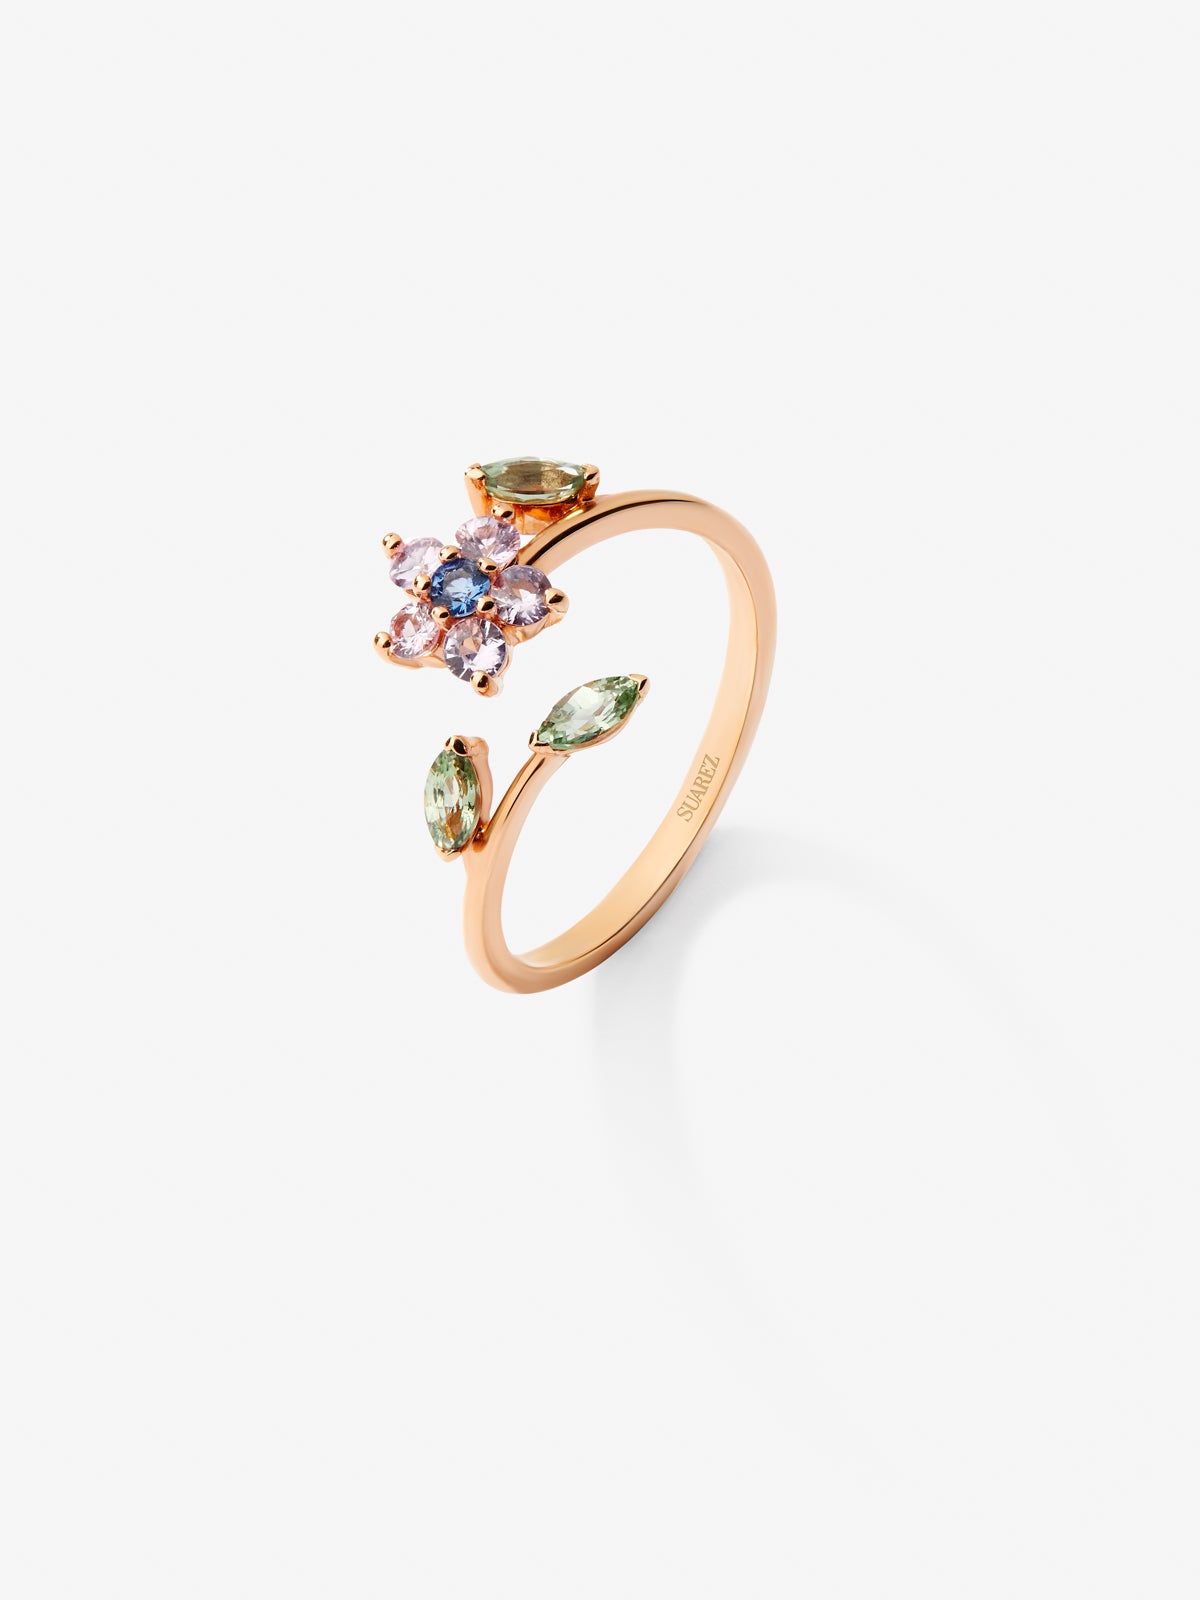 18K rose gold ring with 9 pink, green and blue sapphires in brilliant and marquise cut with a total of 0.55 cts